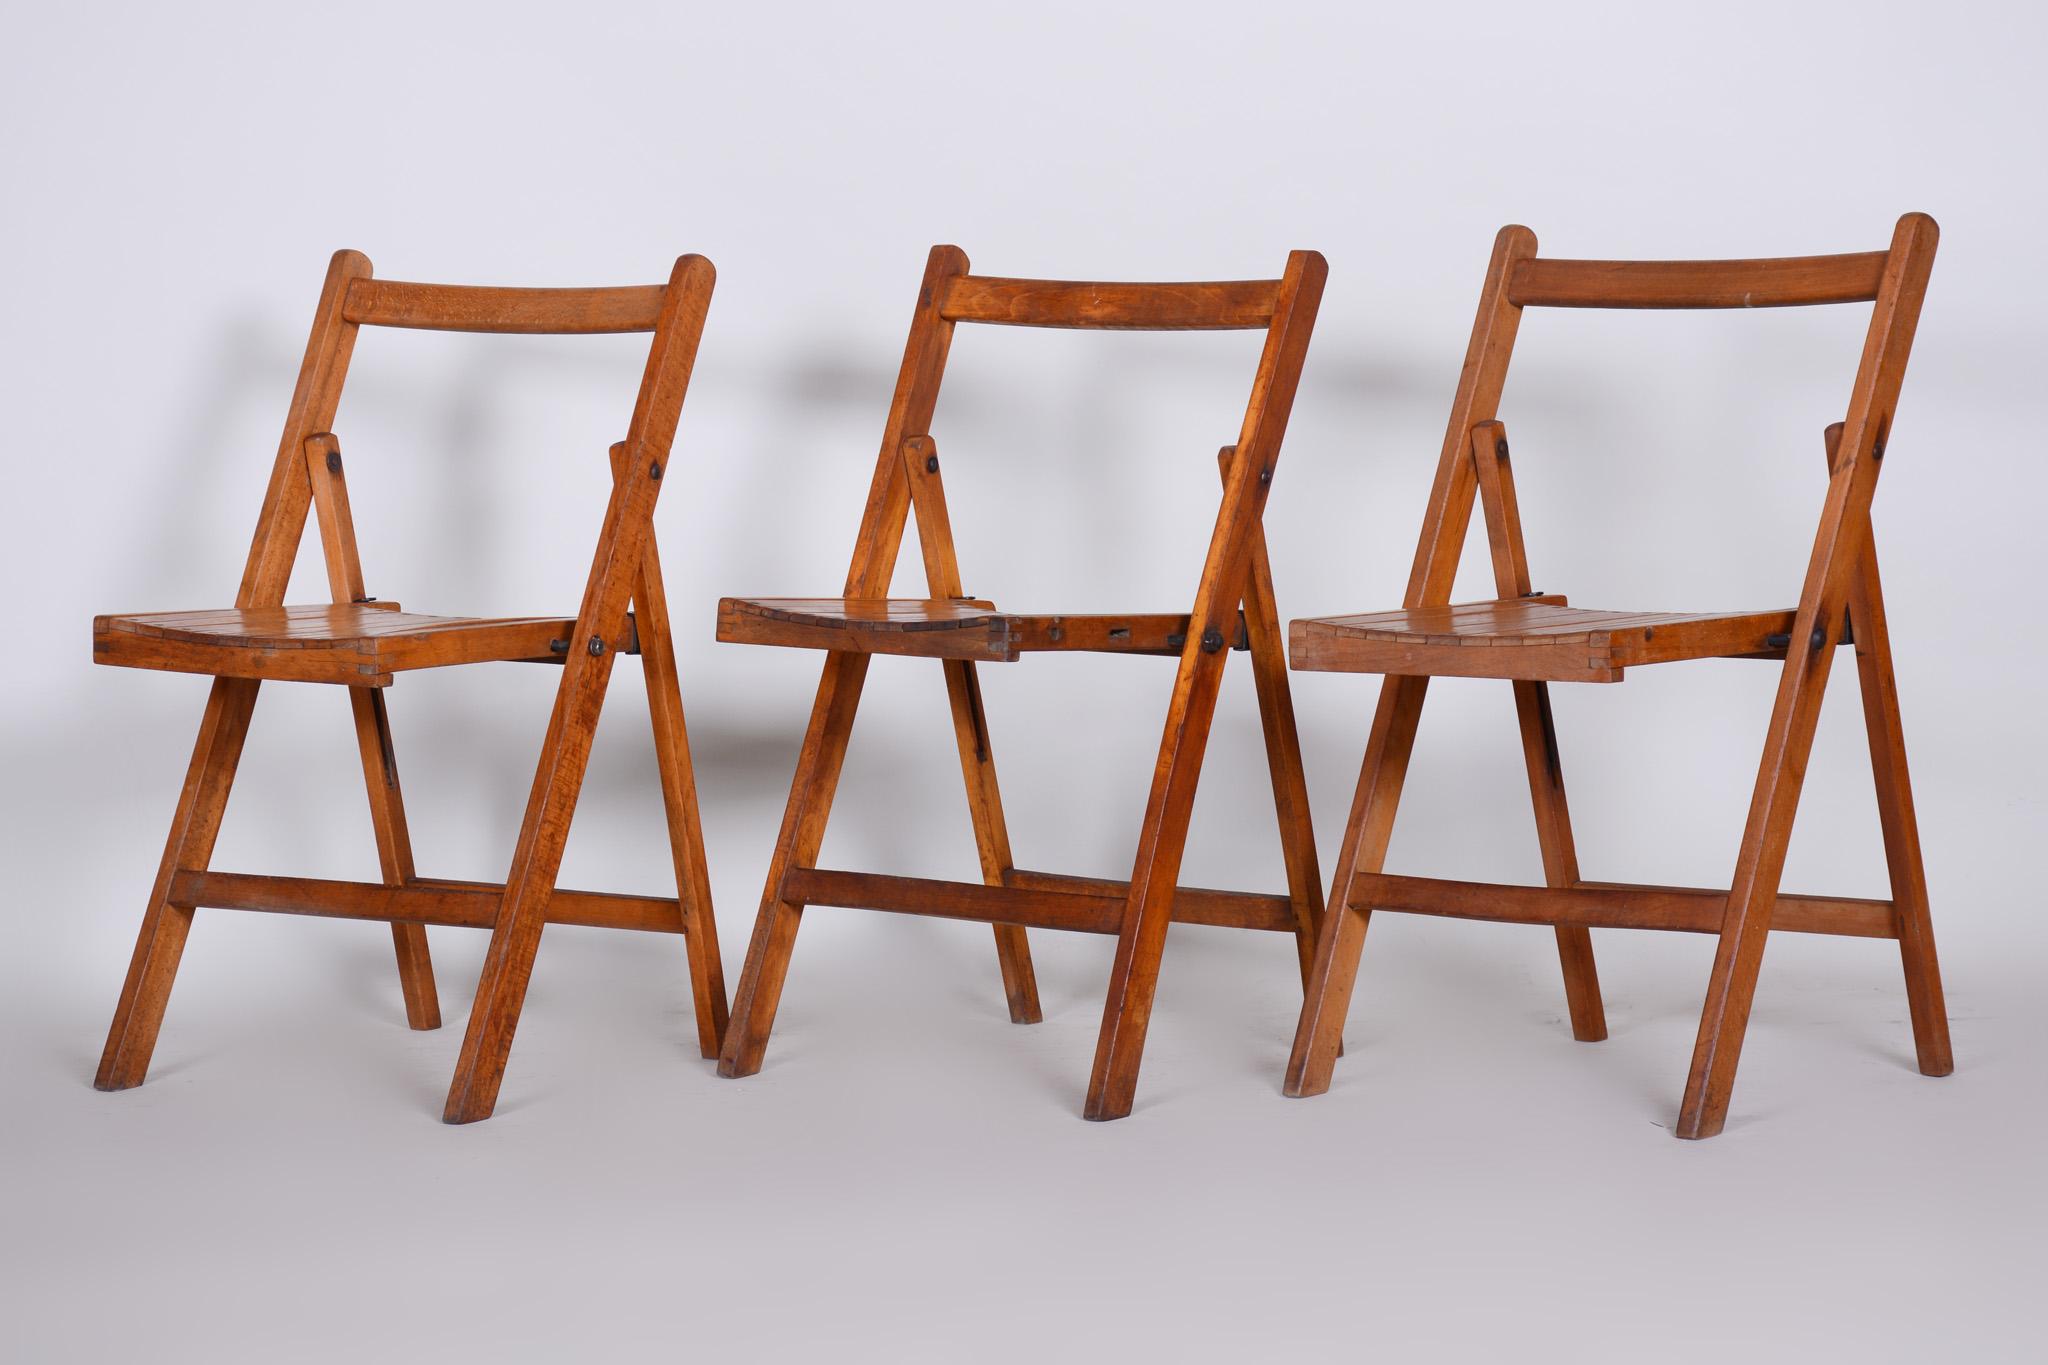 Beech Midcentury Chairs, 3 Pieces, 1950s, Well Preserved Condition For Sale 7